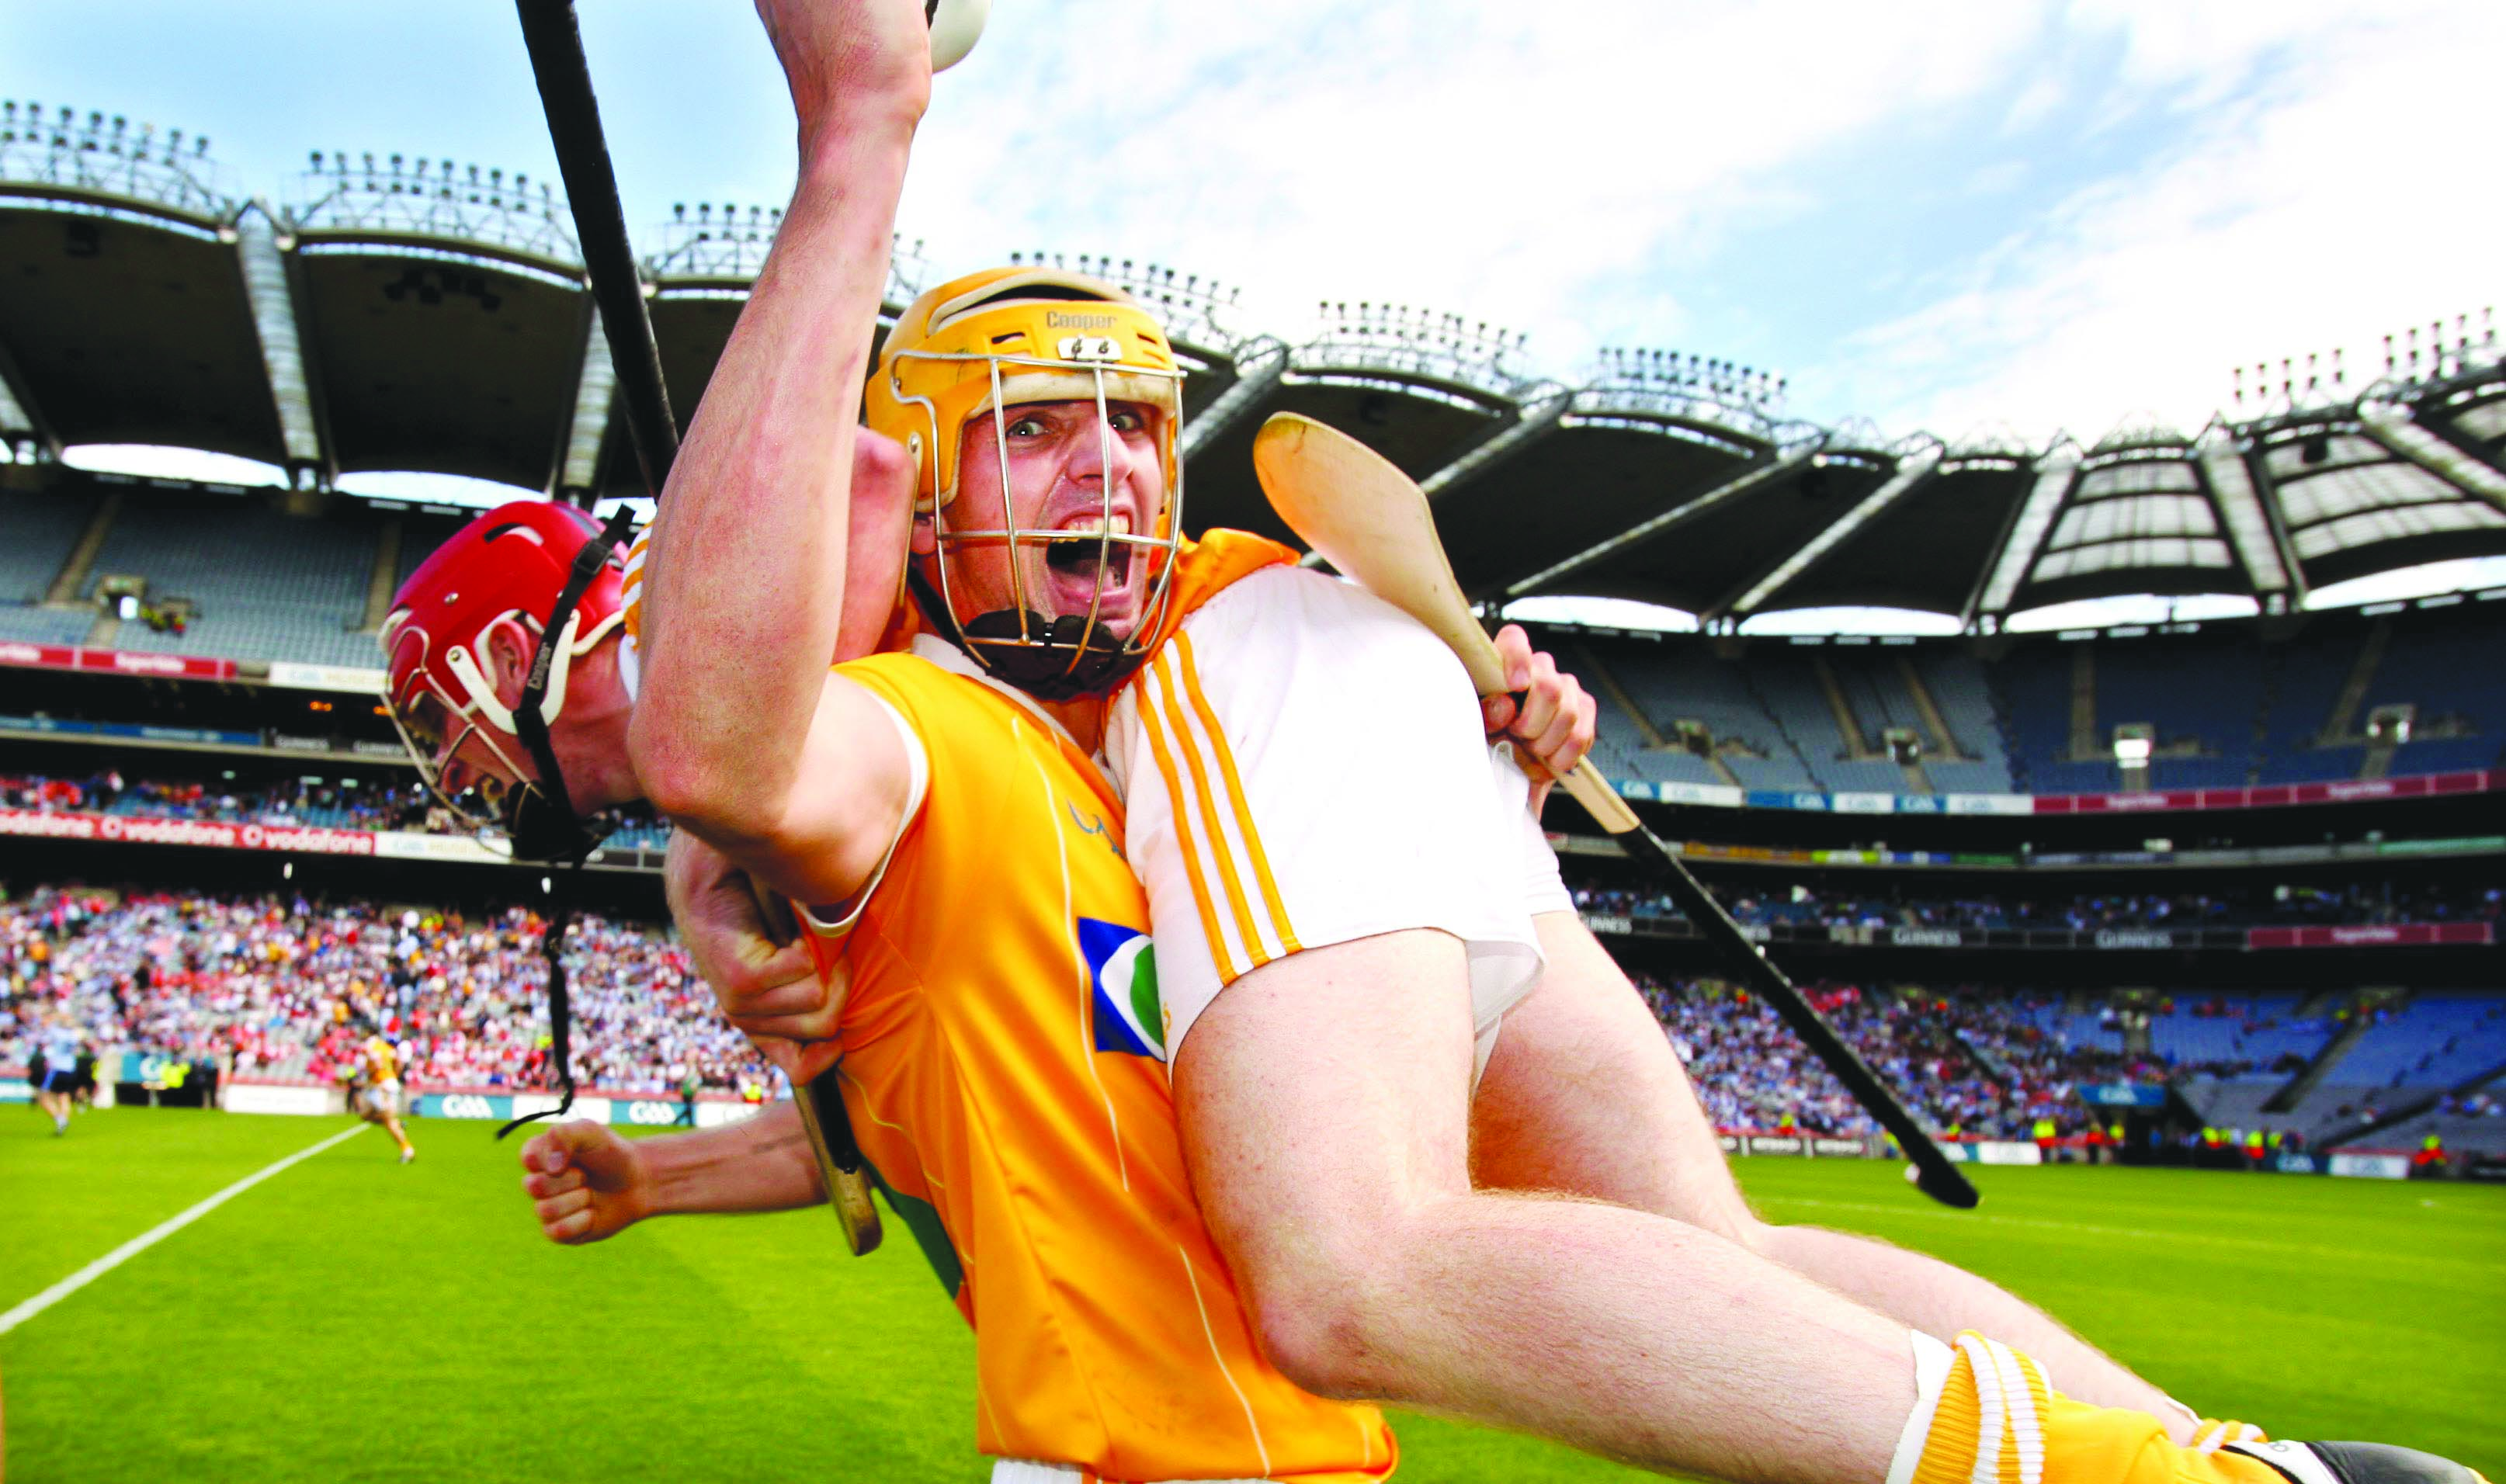 Antrim\'s Simon McCrory celebrates the 2010 Qualifier win over Dublin by lifting PJ O\'Connell at the final whistle. The Saffrons return to Croke Park for Saturday’s Christy Ring Cup final against Meath